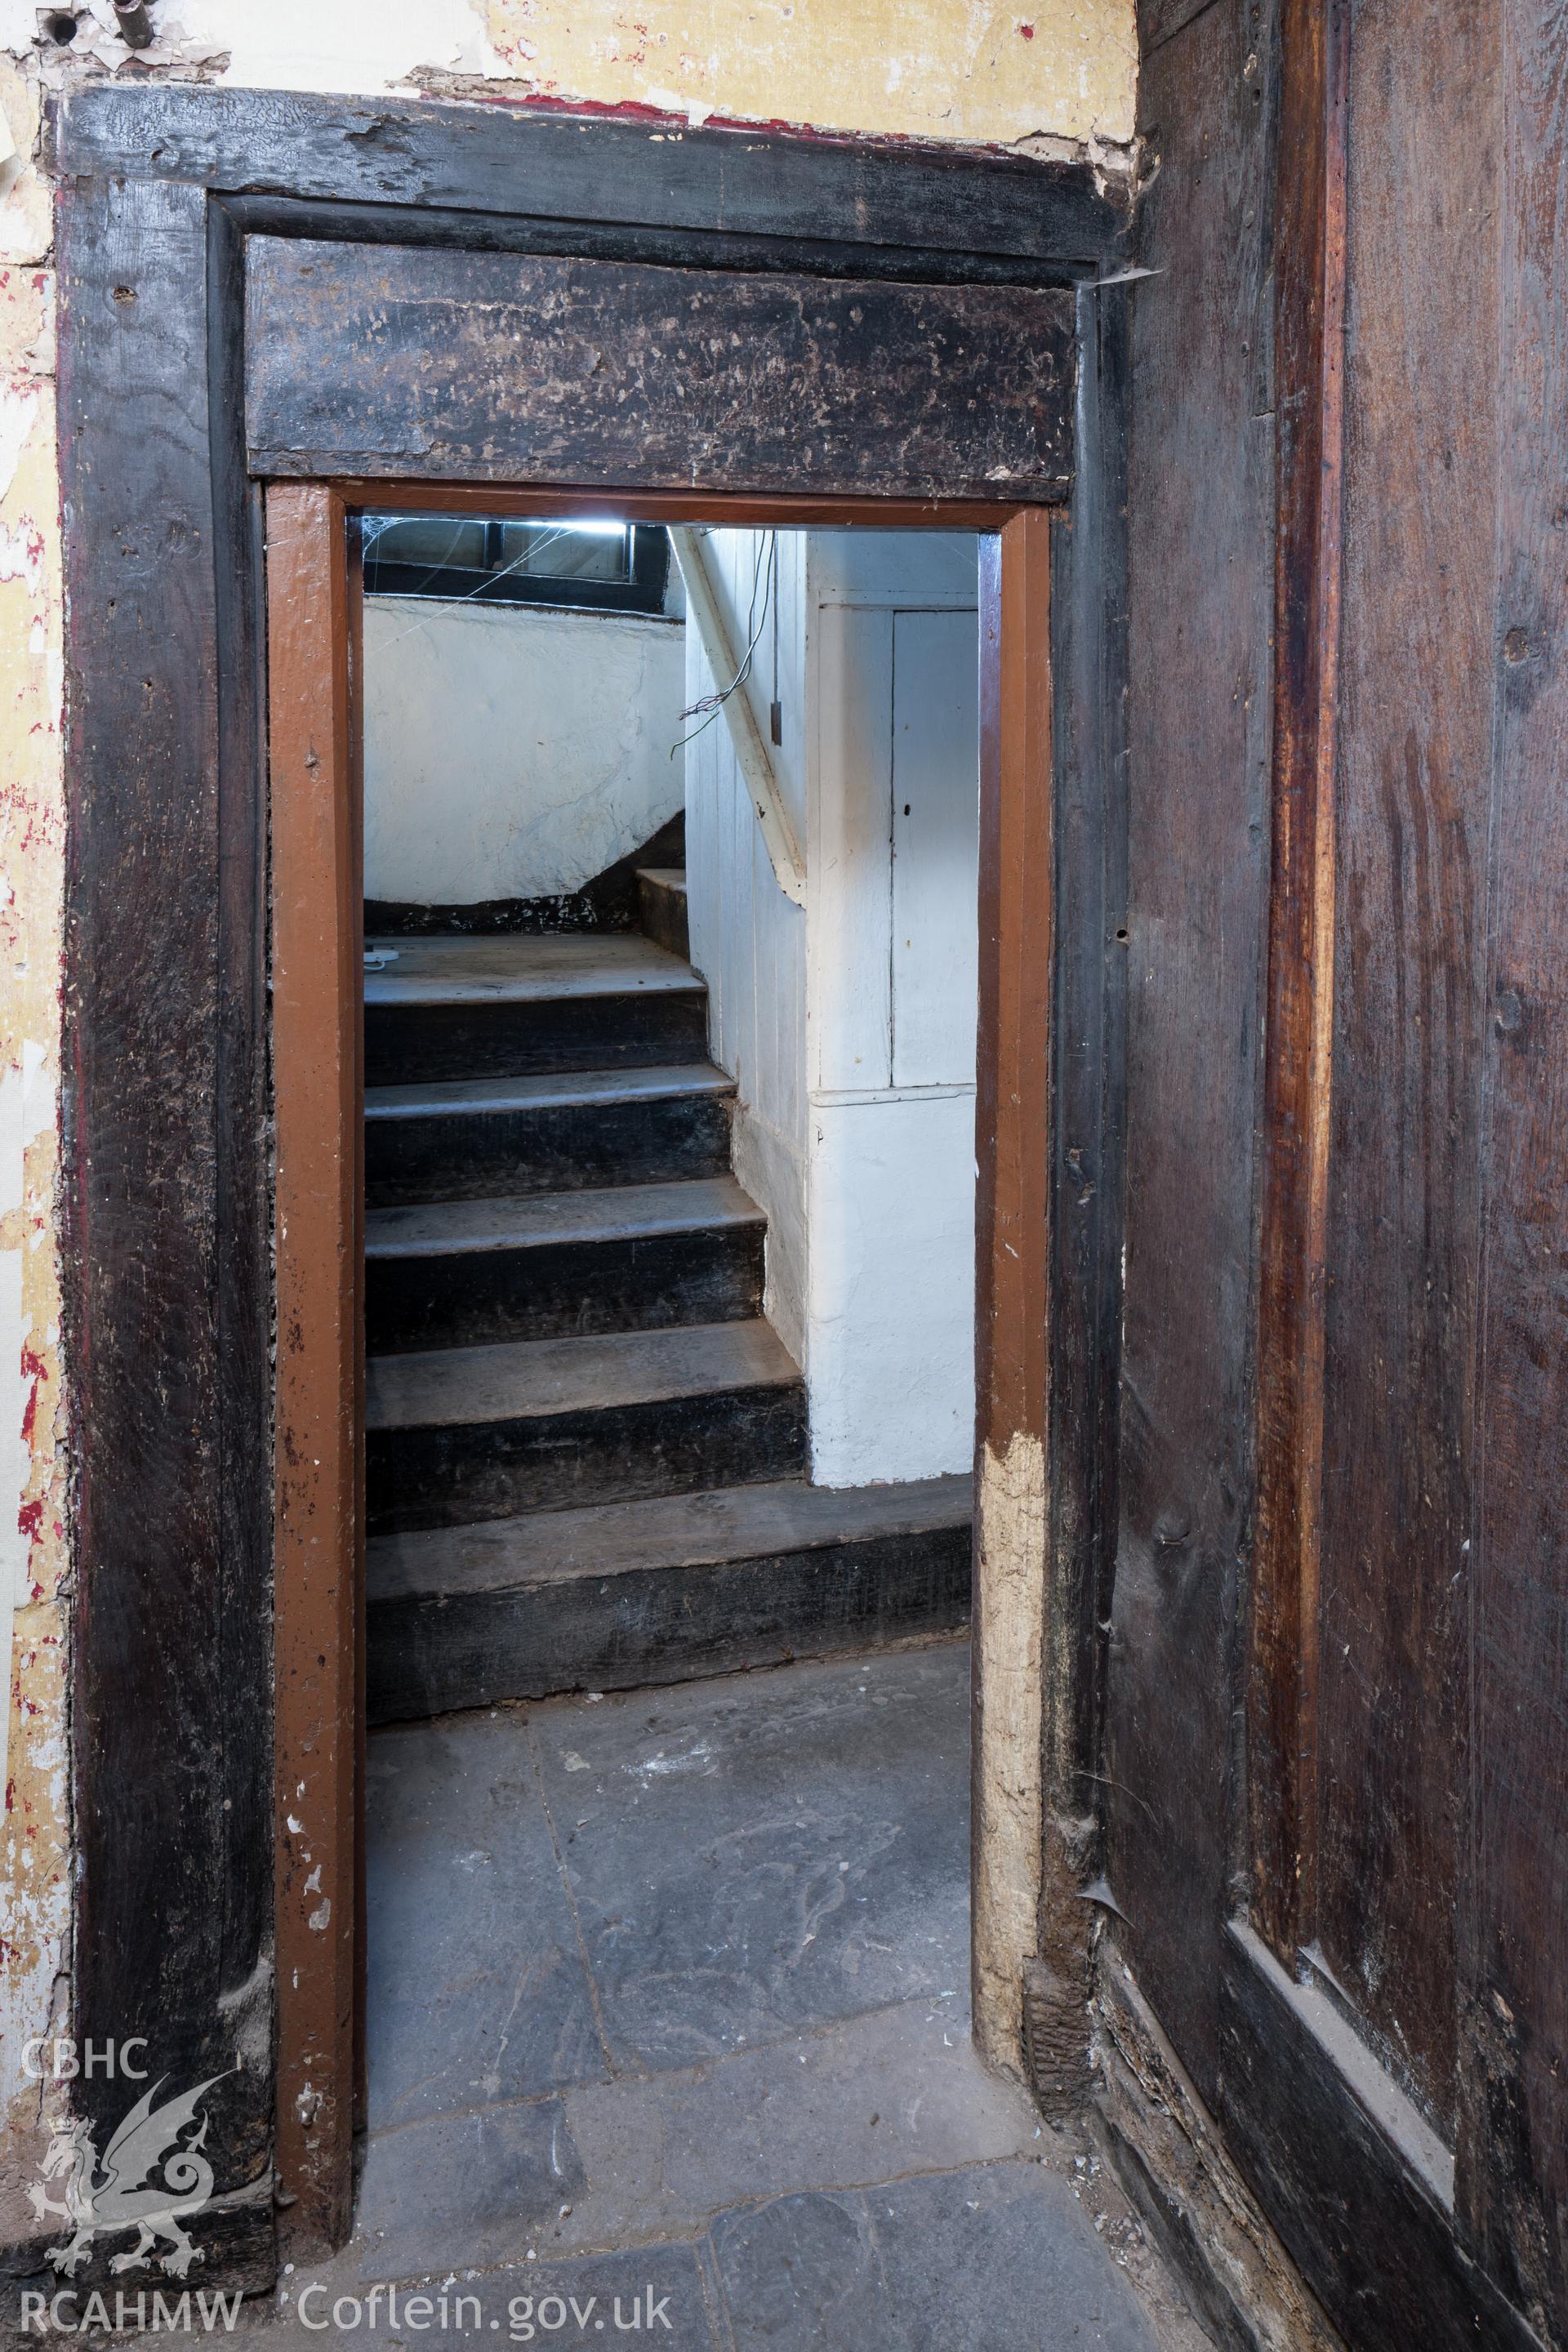 Doorway from passage to stair